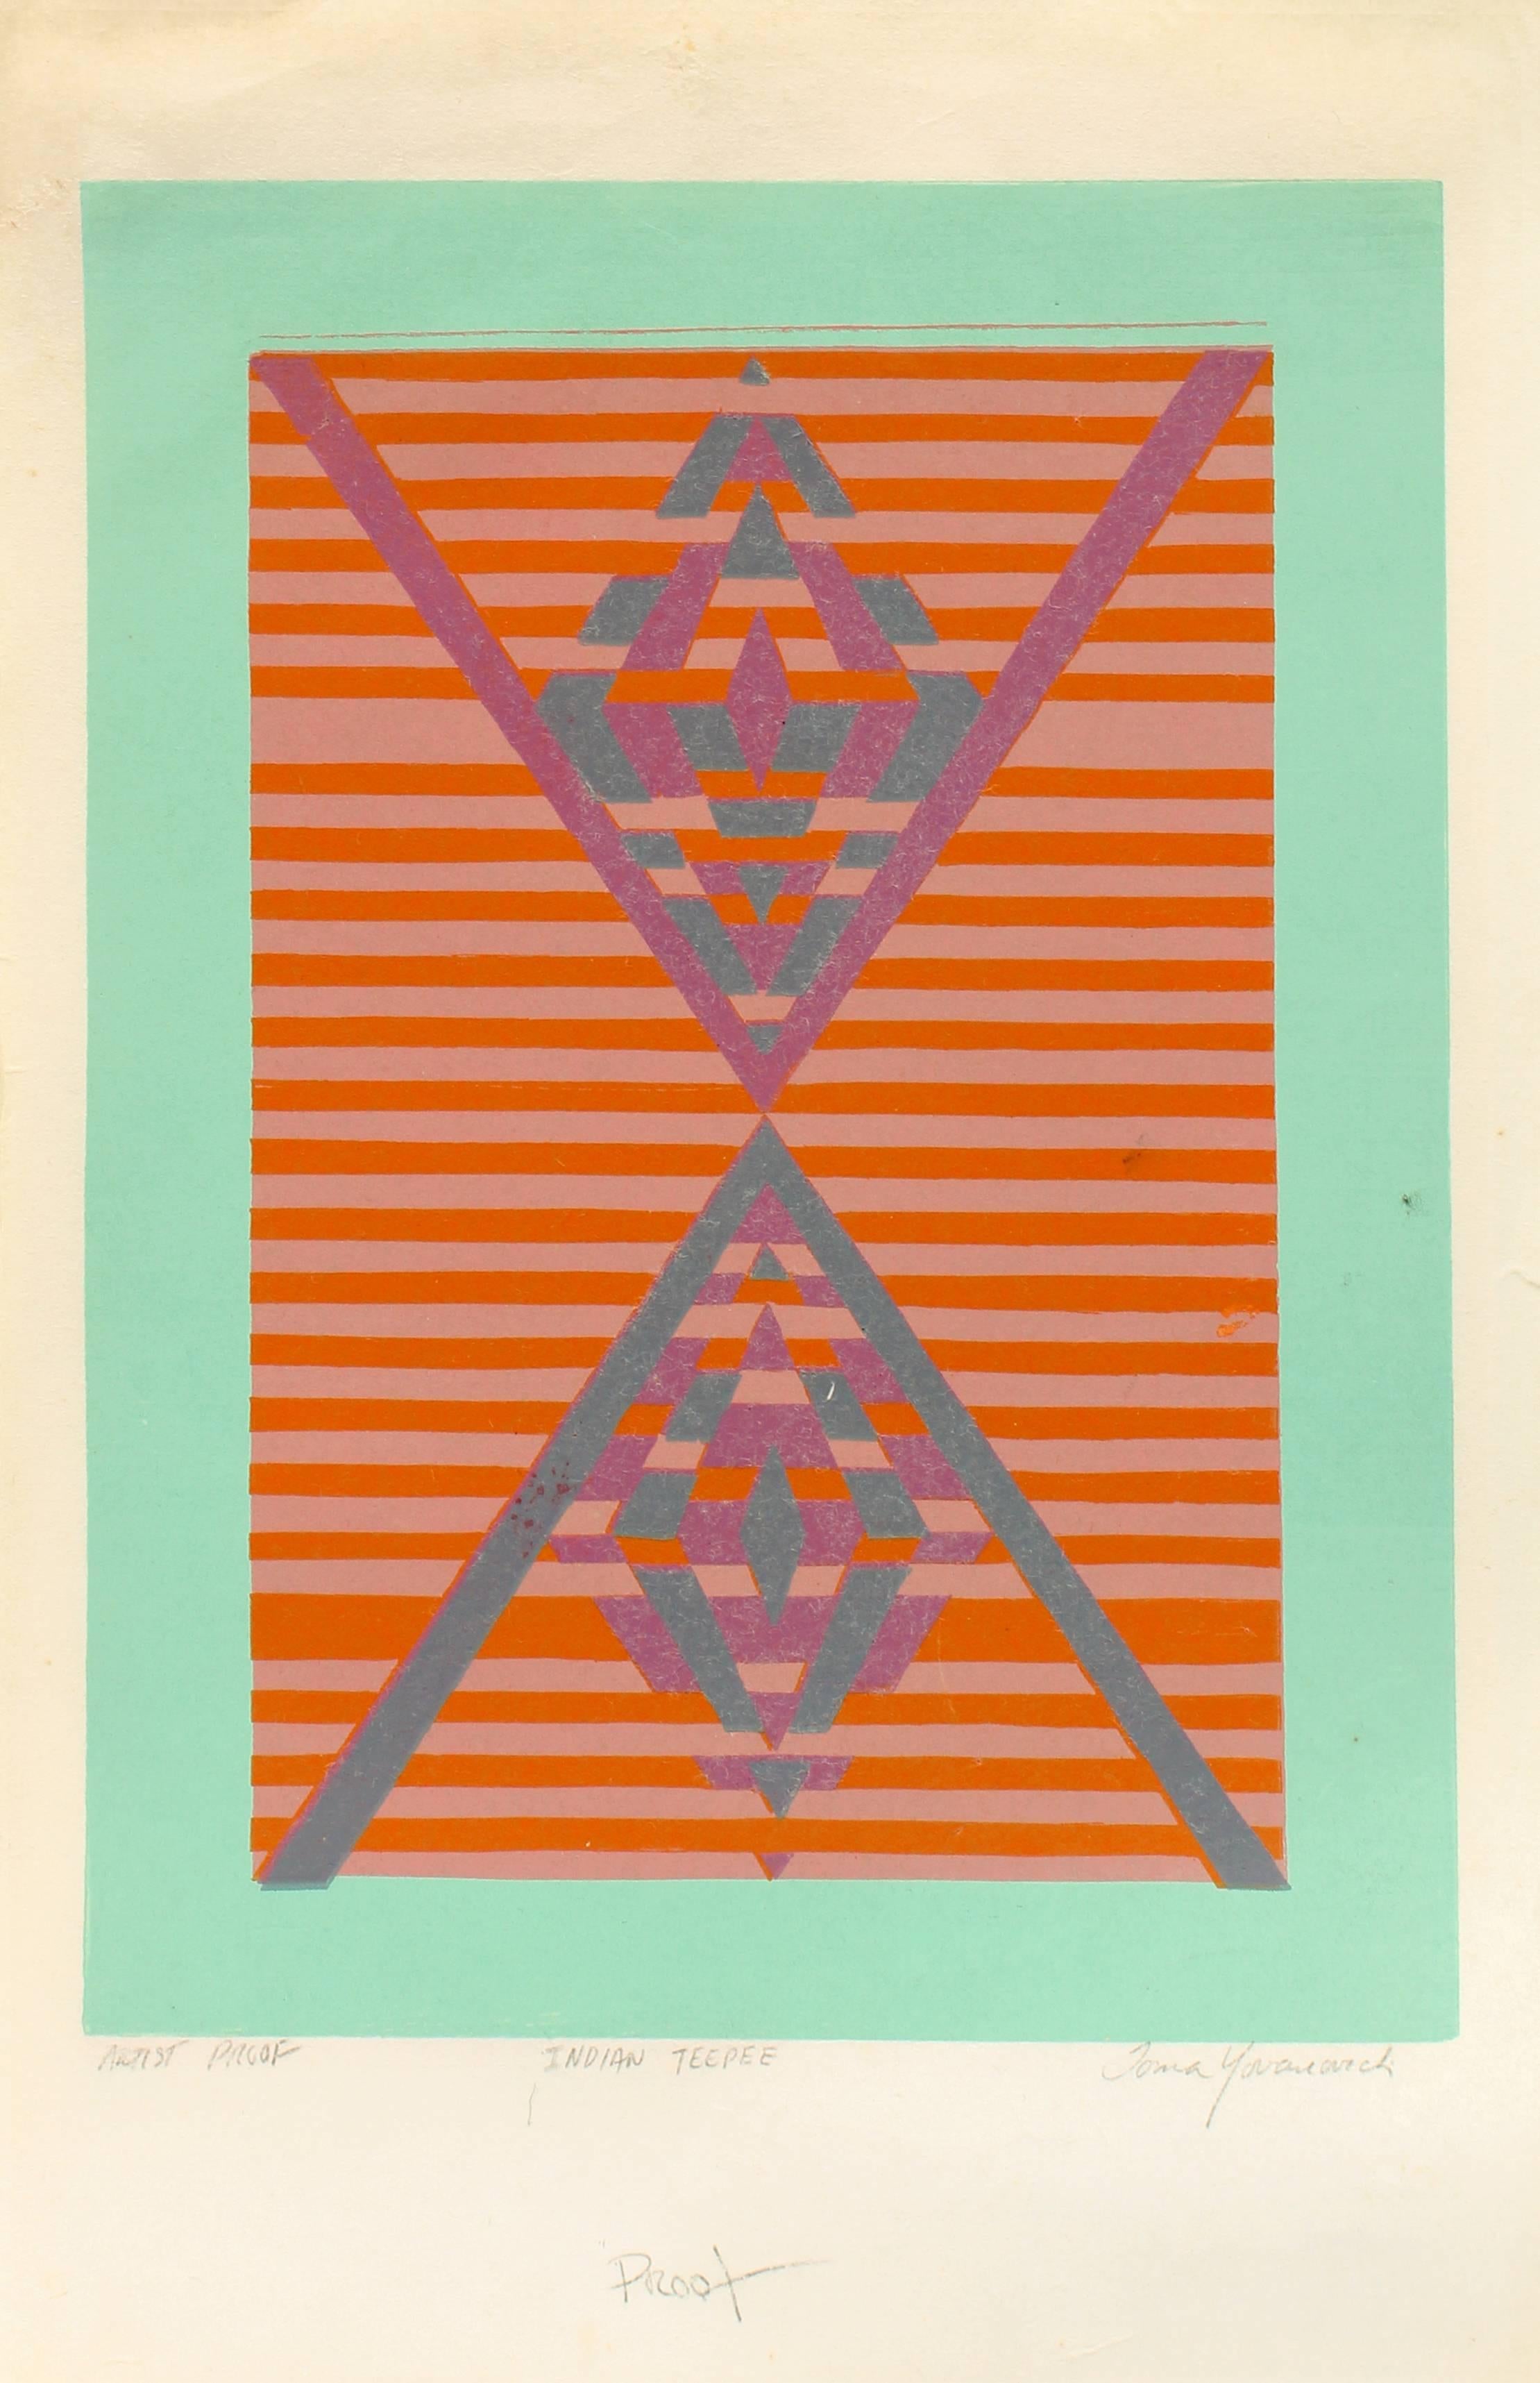 Mid-Century Modern geometric abstract print by American artist Toma Tovanovich (1931- 2016).  Tovanovich's work is found in many public and private collections all over the world. Circa 1960, unframed, signed 